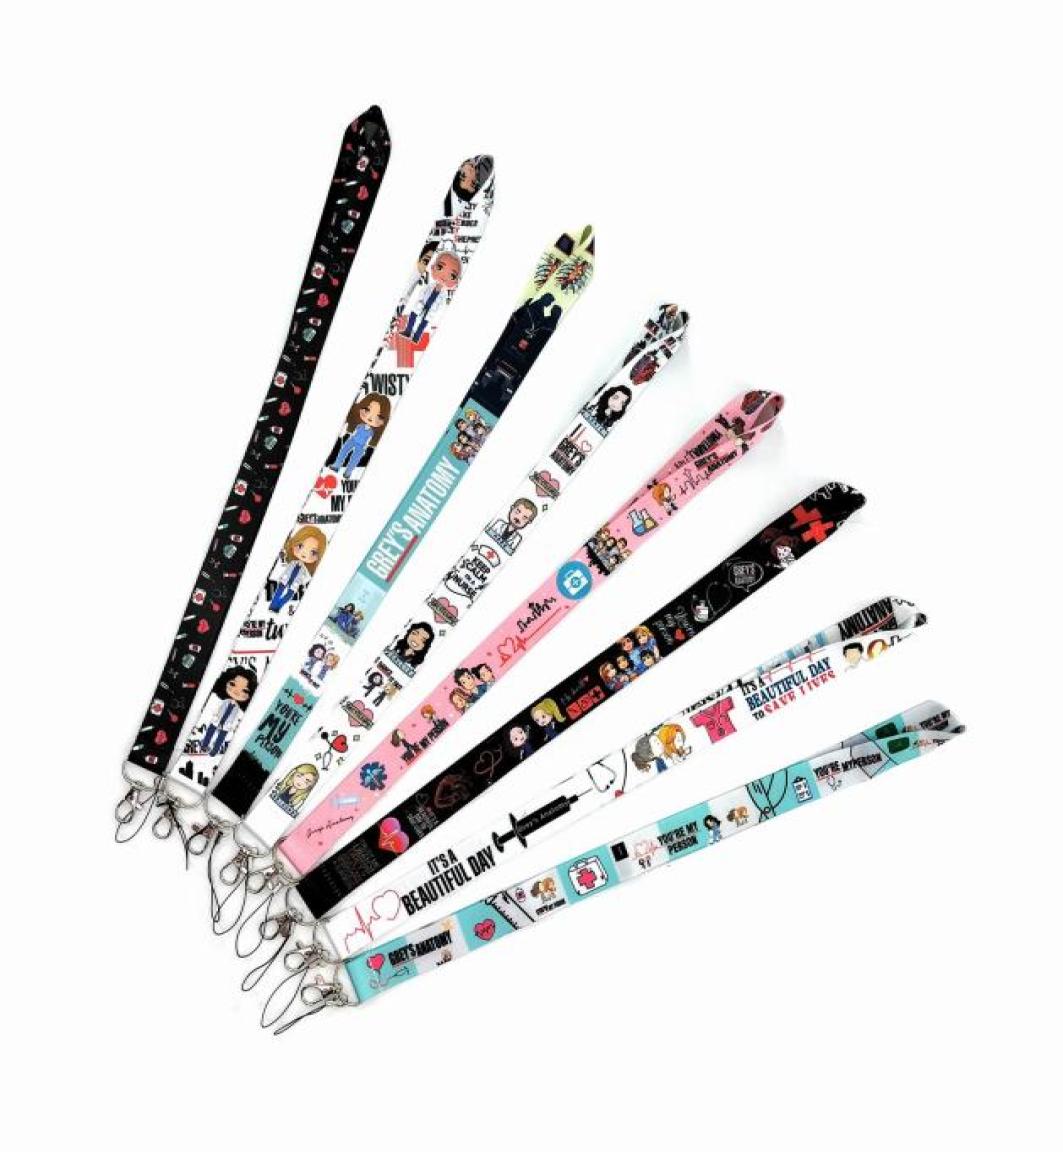 

Grey039s Anatomy Medical Lanyard Keychain Lanyards for Key Badges ID Cell Phone Rope Neck Straps Doctor Nurse Accessories9995857